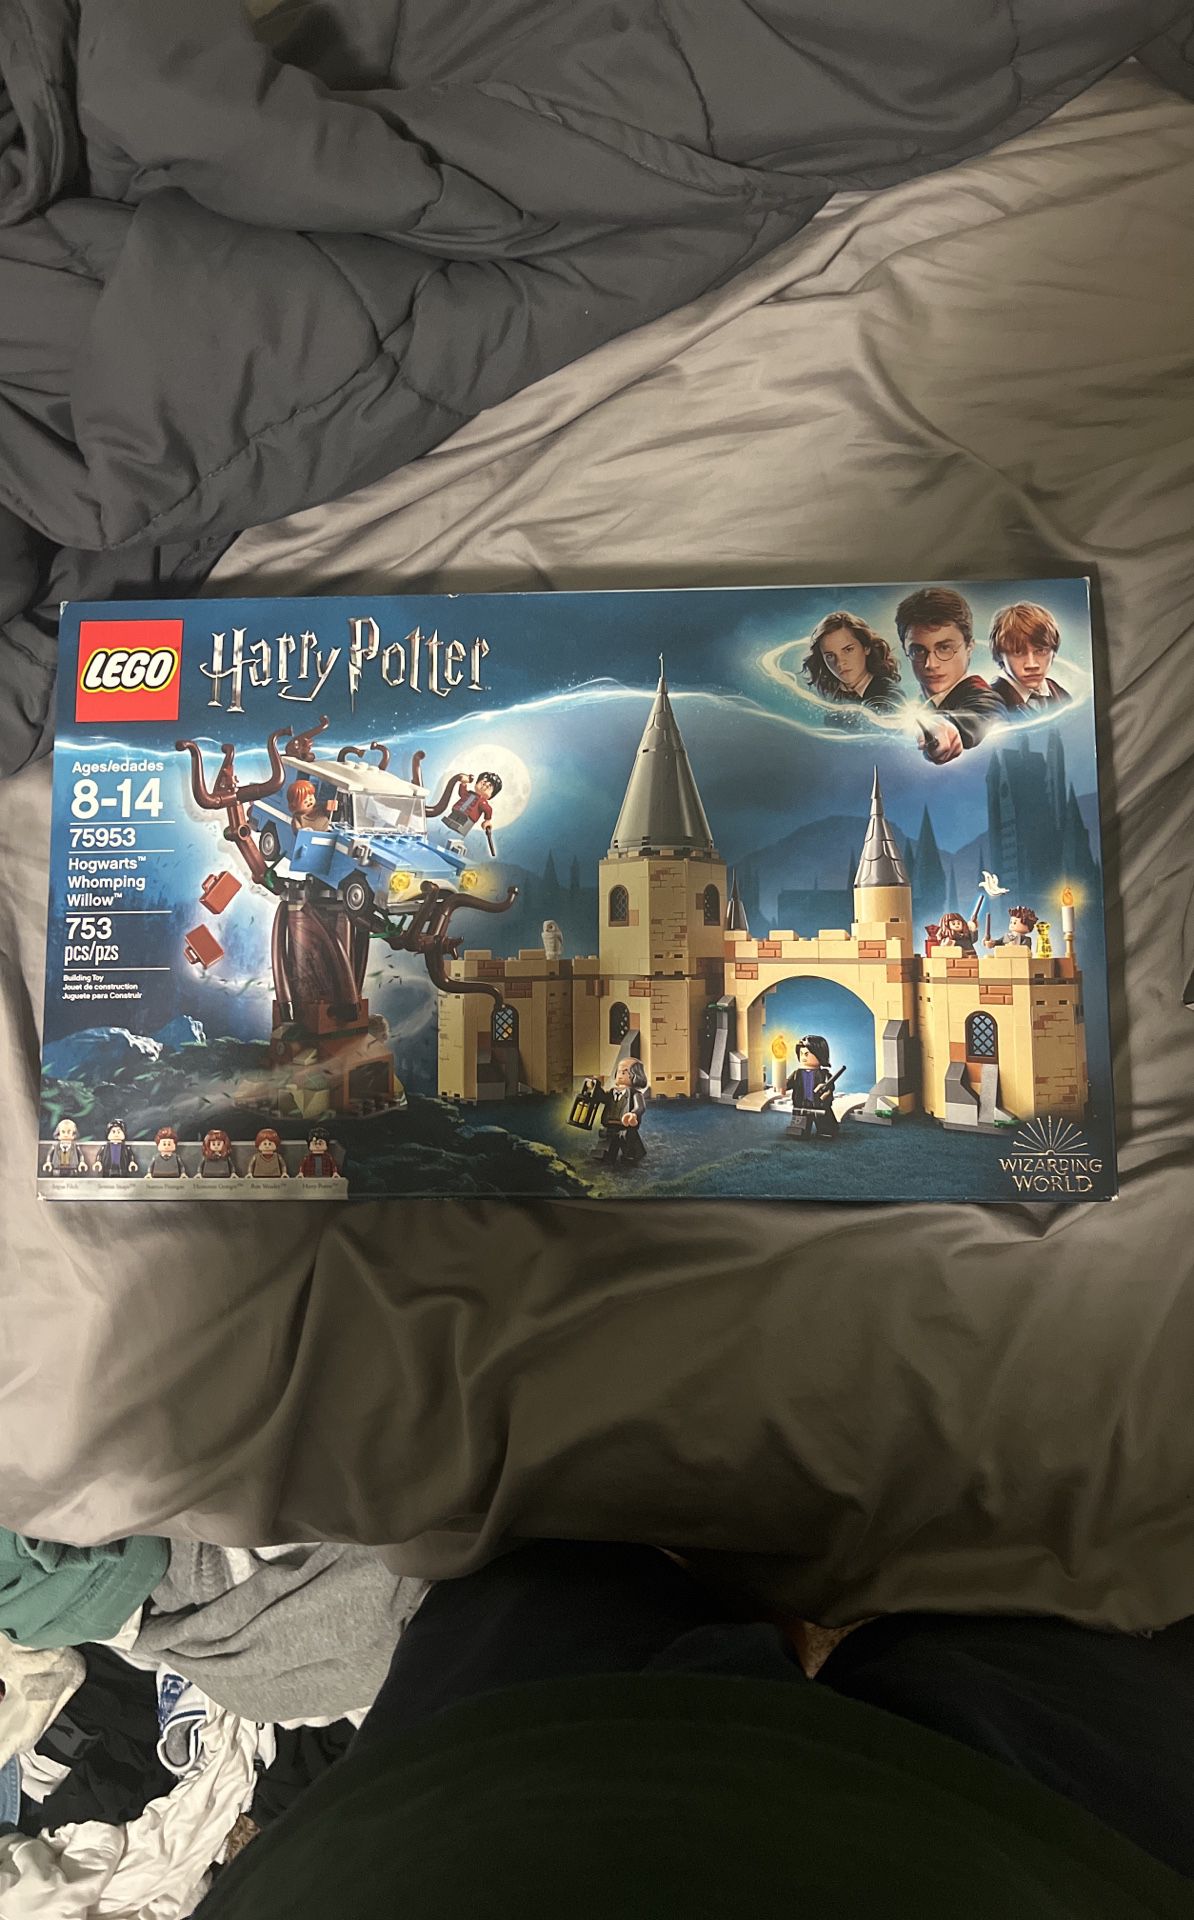 Lego Harry Potter, Hogwarts Whomping Willow